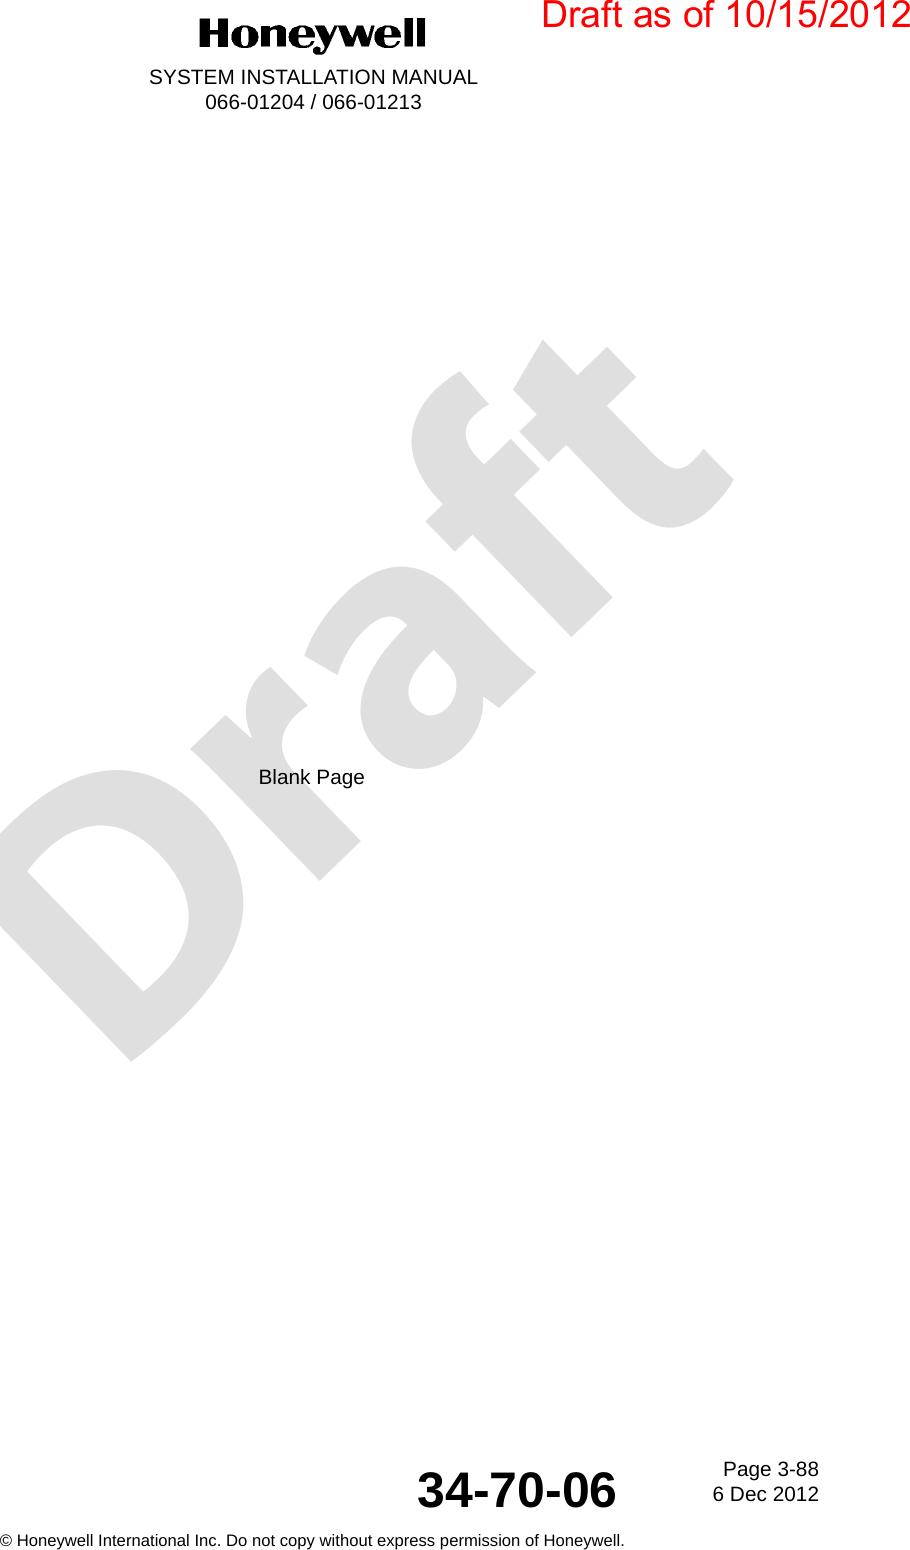 DraftPage 3-886 Dec 201234-70-06SYSTEM INSTALLATION MANUAL066-01204 / 066-01213© Honeywell International Inc. Do not copy without express permission of Honeywell.Blank PageDraft as of 10/15/2012